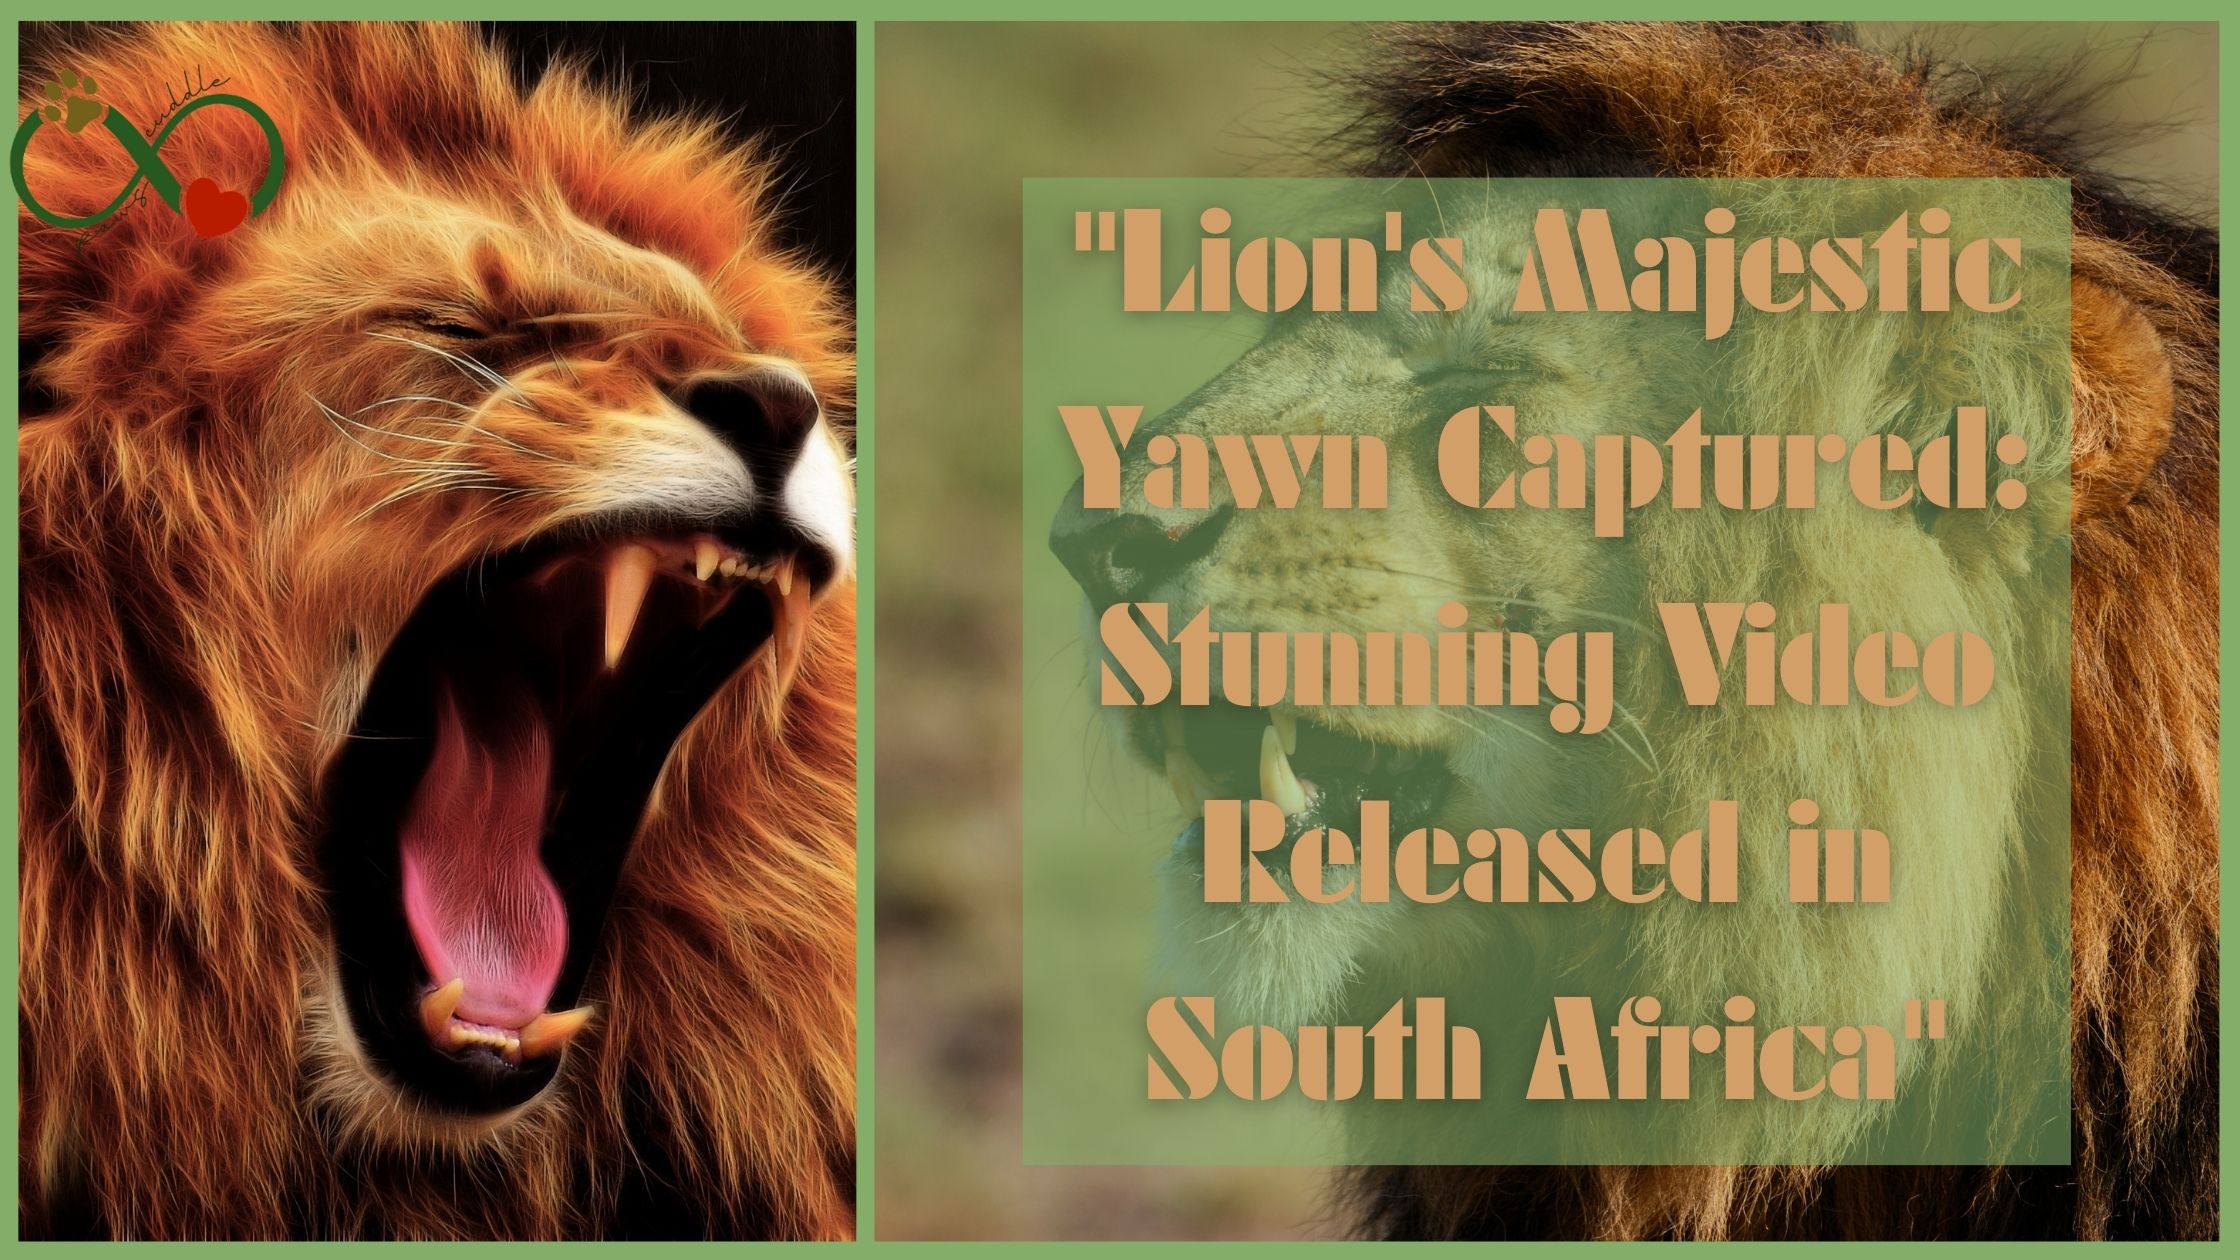 "Lion's Majestic Yawn Captured: Stunning Video Released in South Africa"